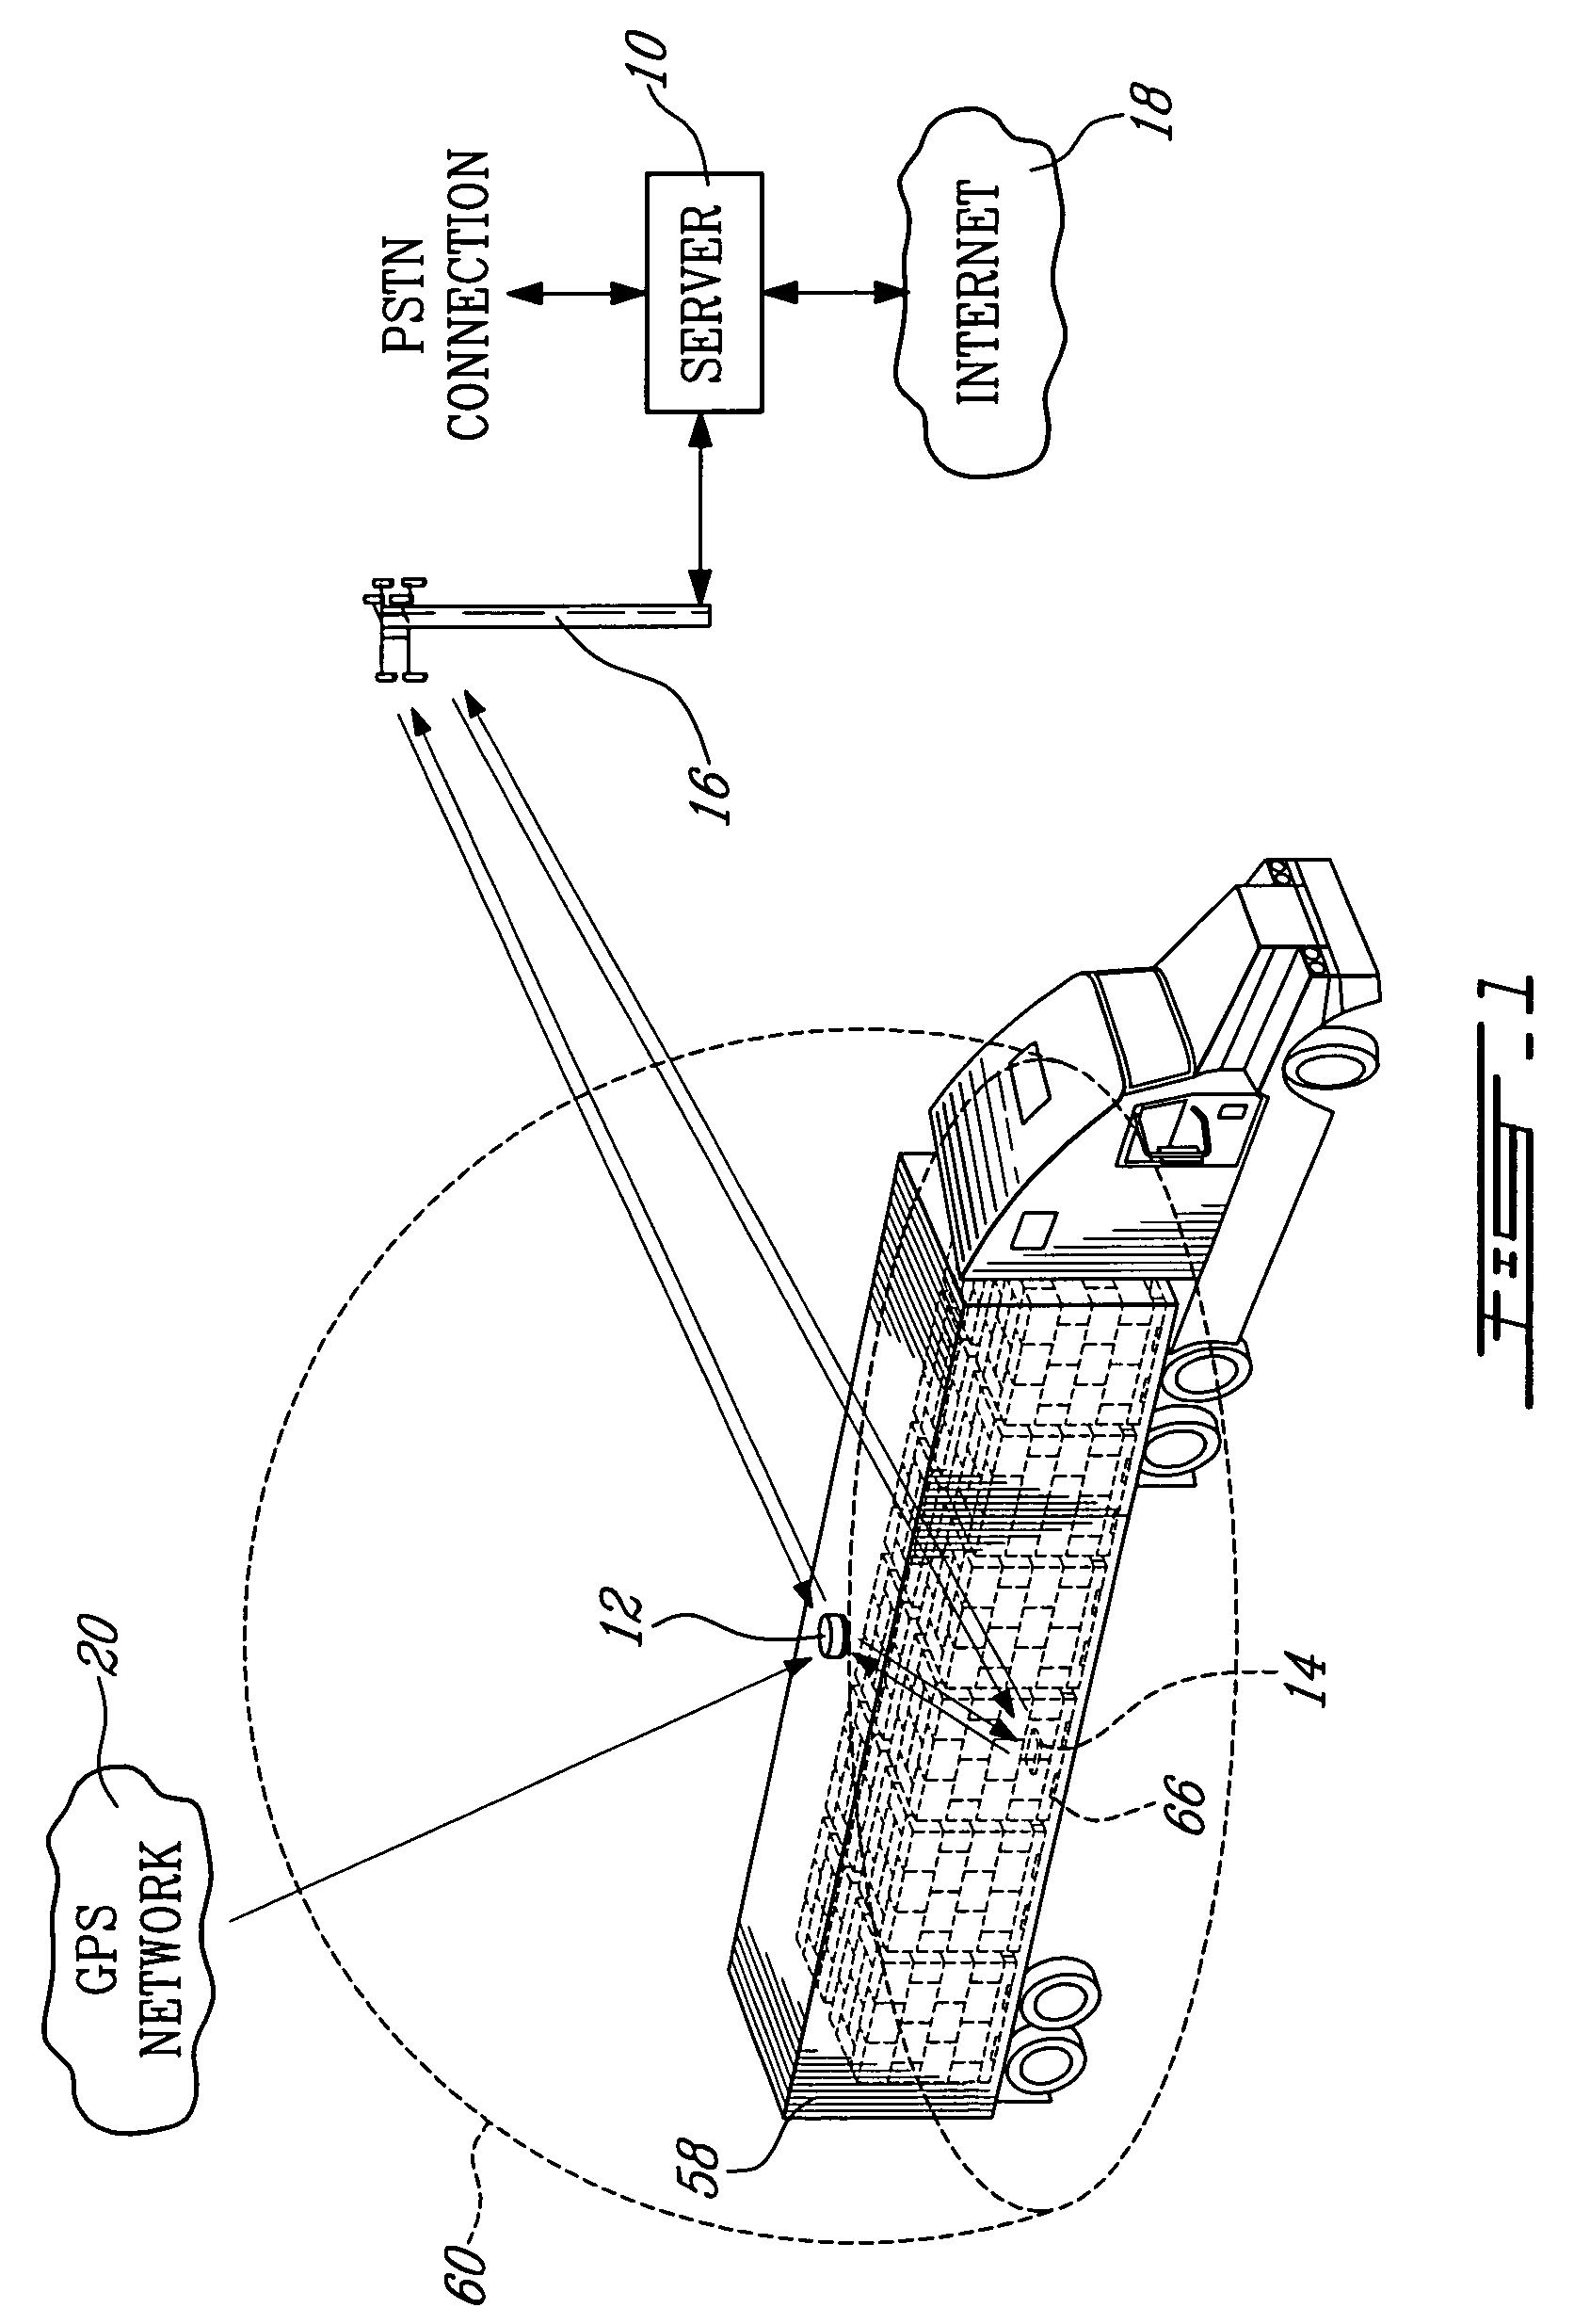 System and method for cargo protection